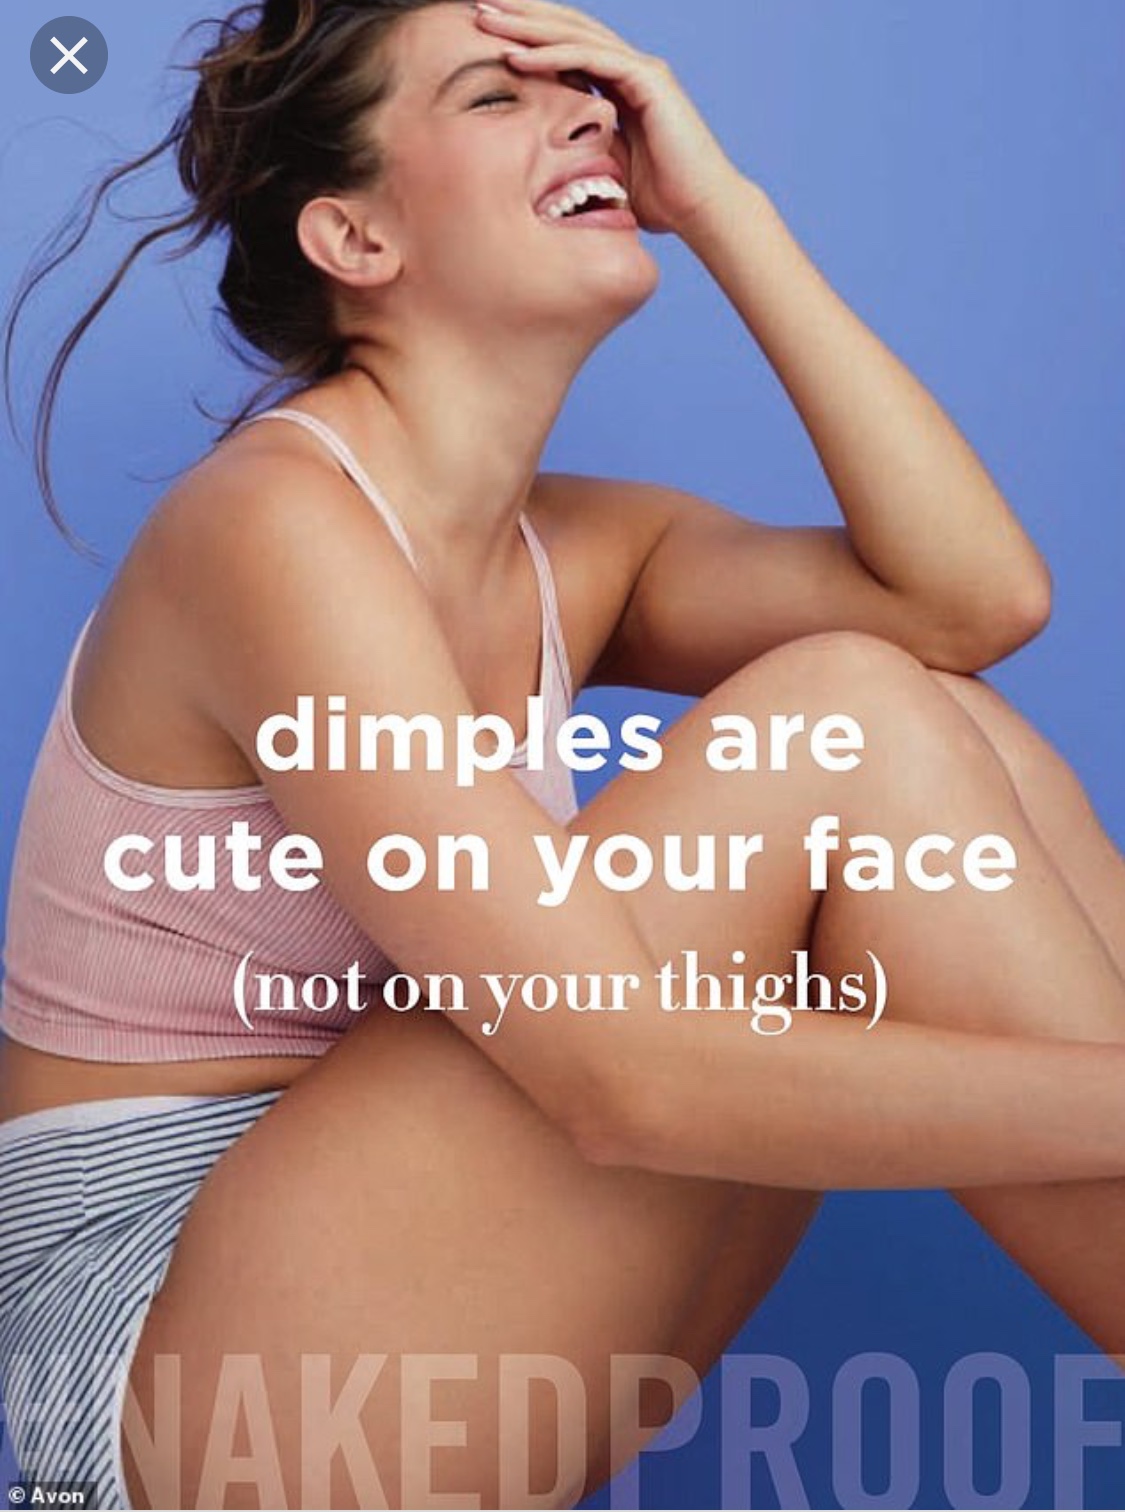 Woman laughing, dressed in short striped shorts and pink tank top. Hair is pulled up and hand his brought up to forehead. Words on picture read: dimples are cute on your face not on your thighs